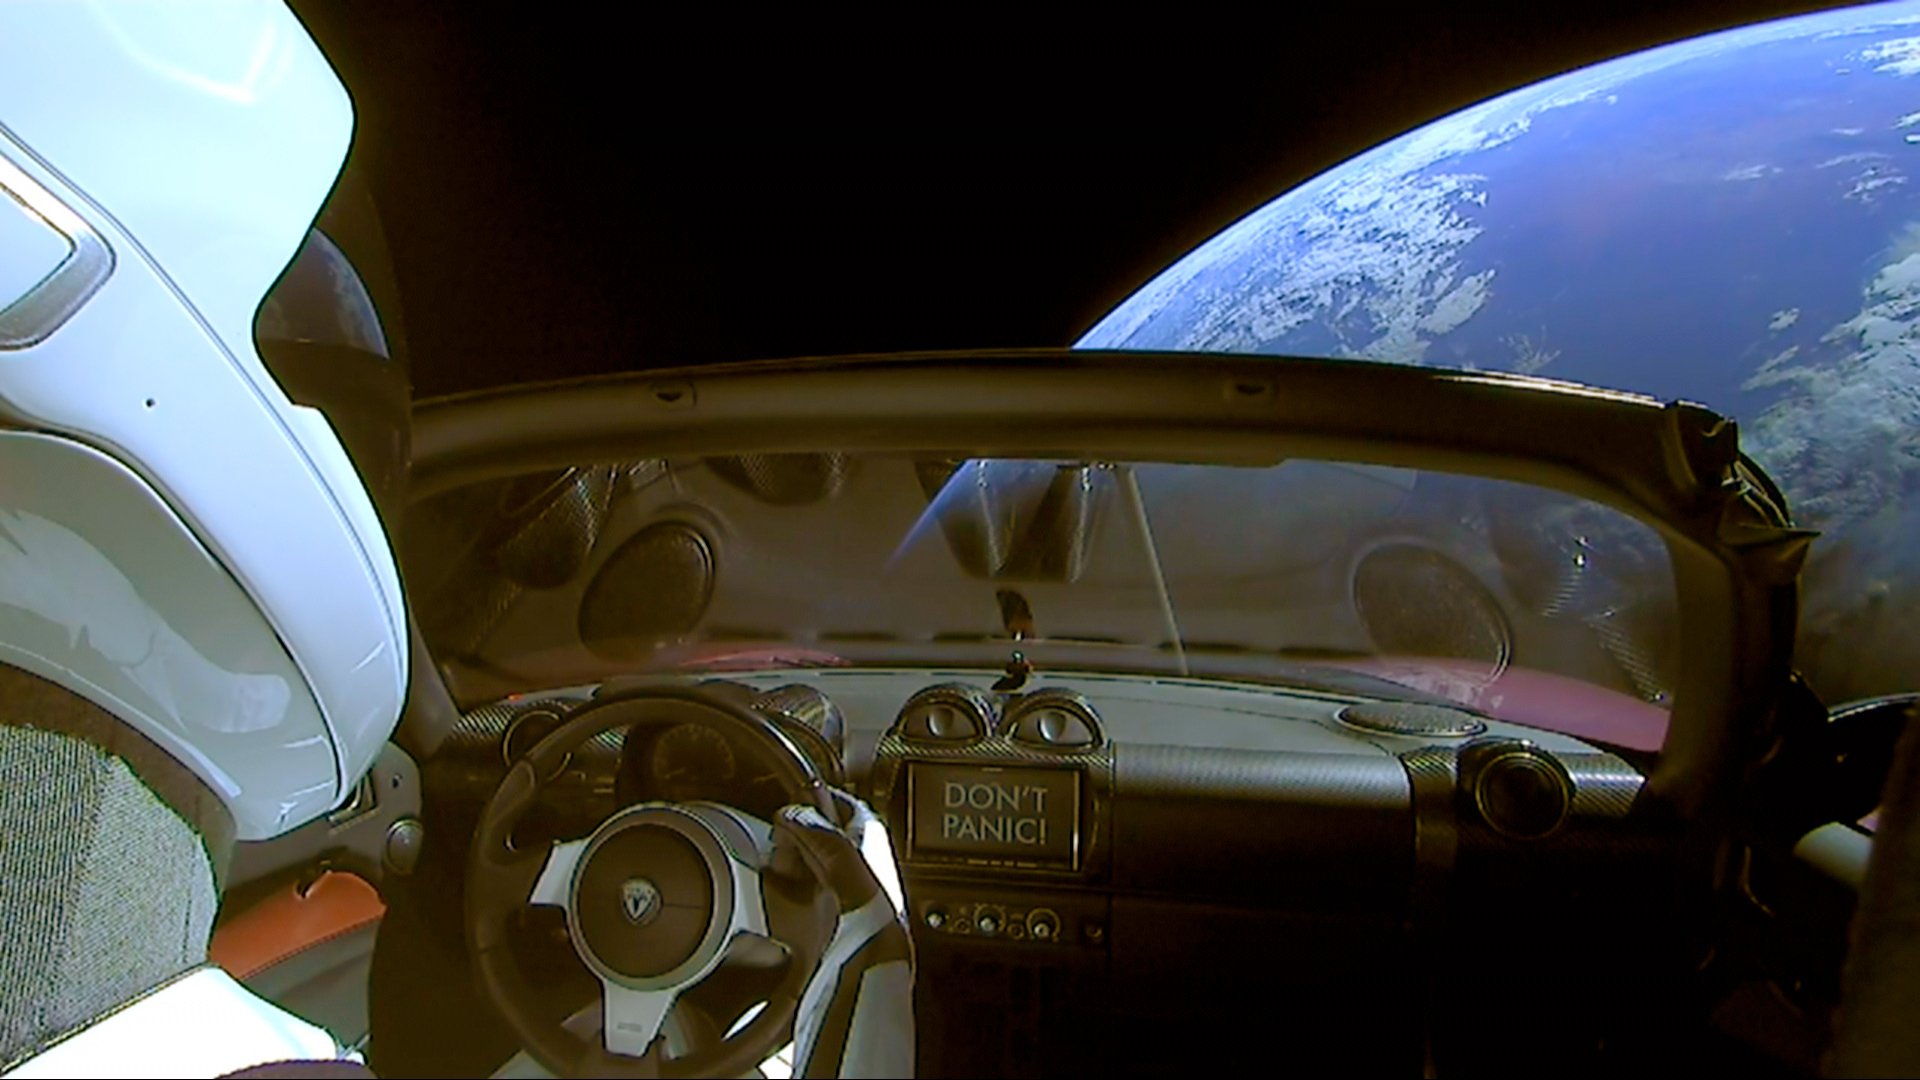 A Tesla Roadster car with a dummy driver wearing a space suit floats in space with the Earth in the background.